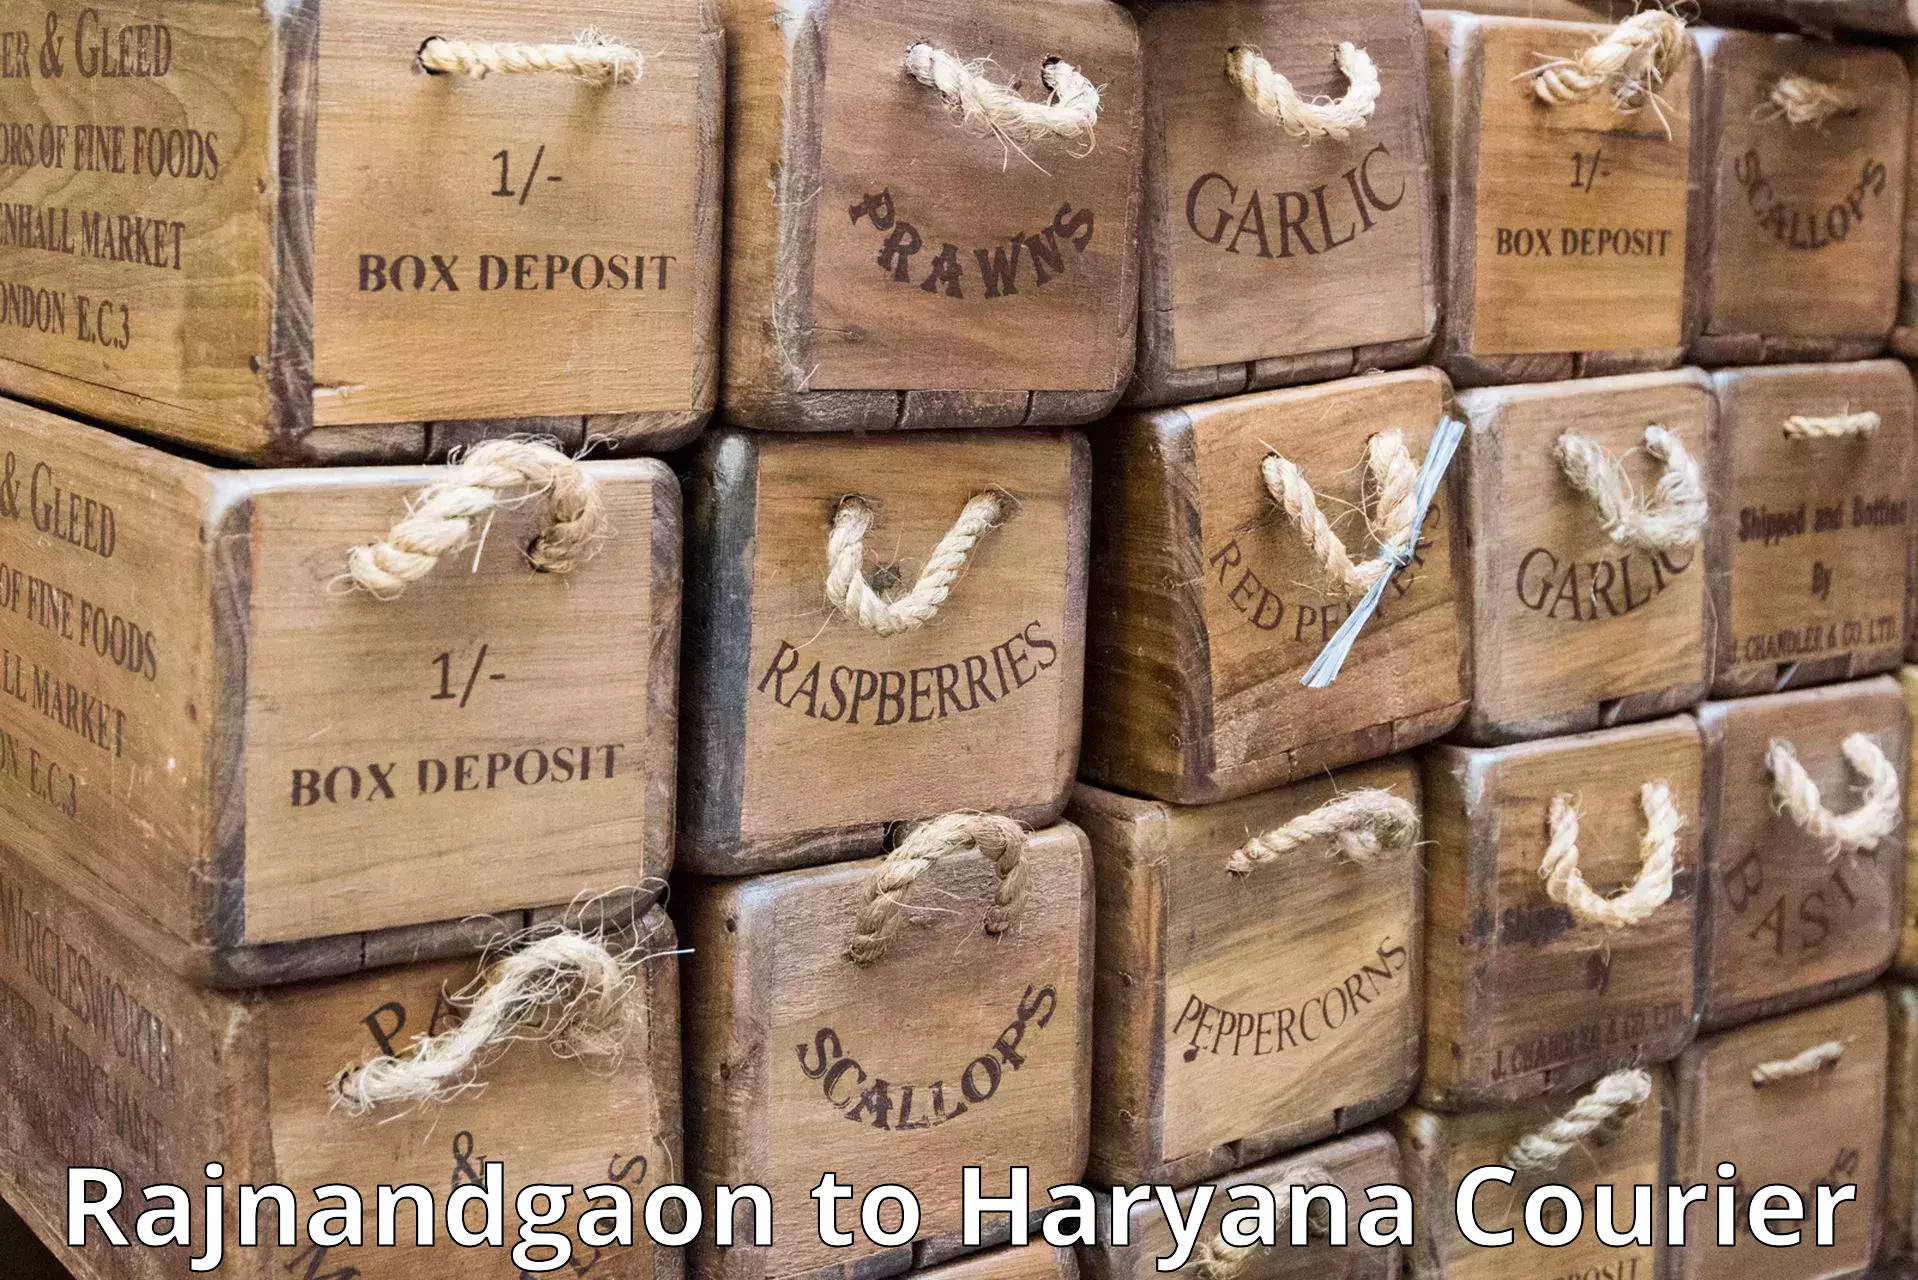 Cash on delivery service Rajnandgaon to Sonipat